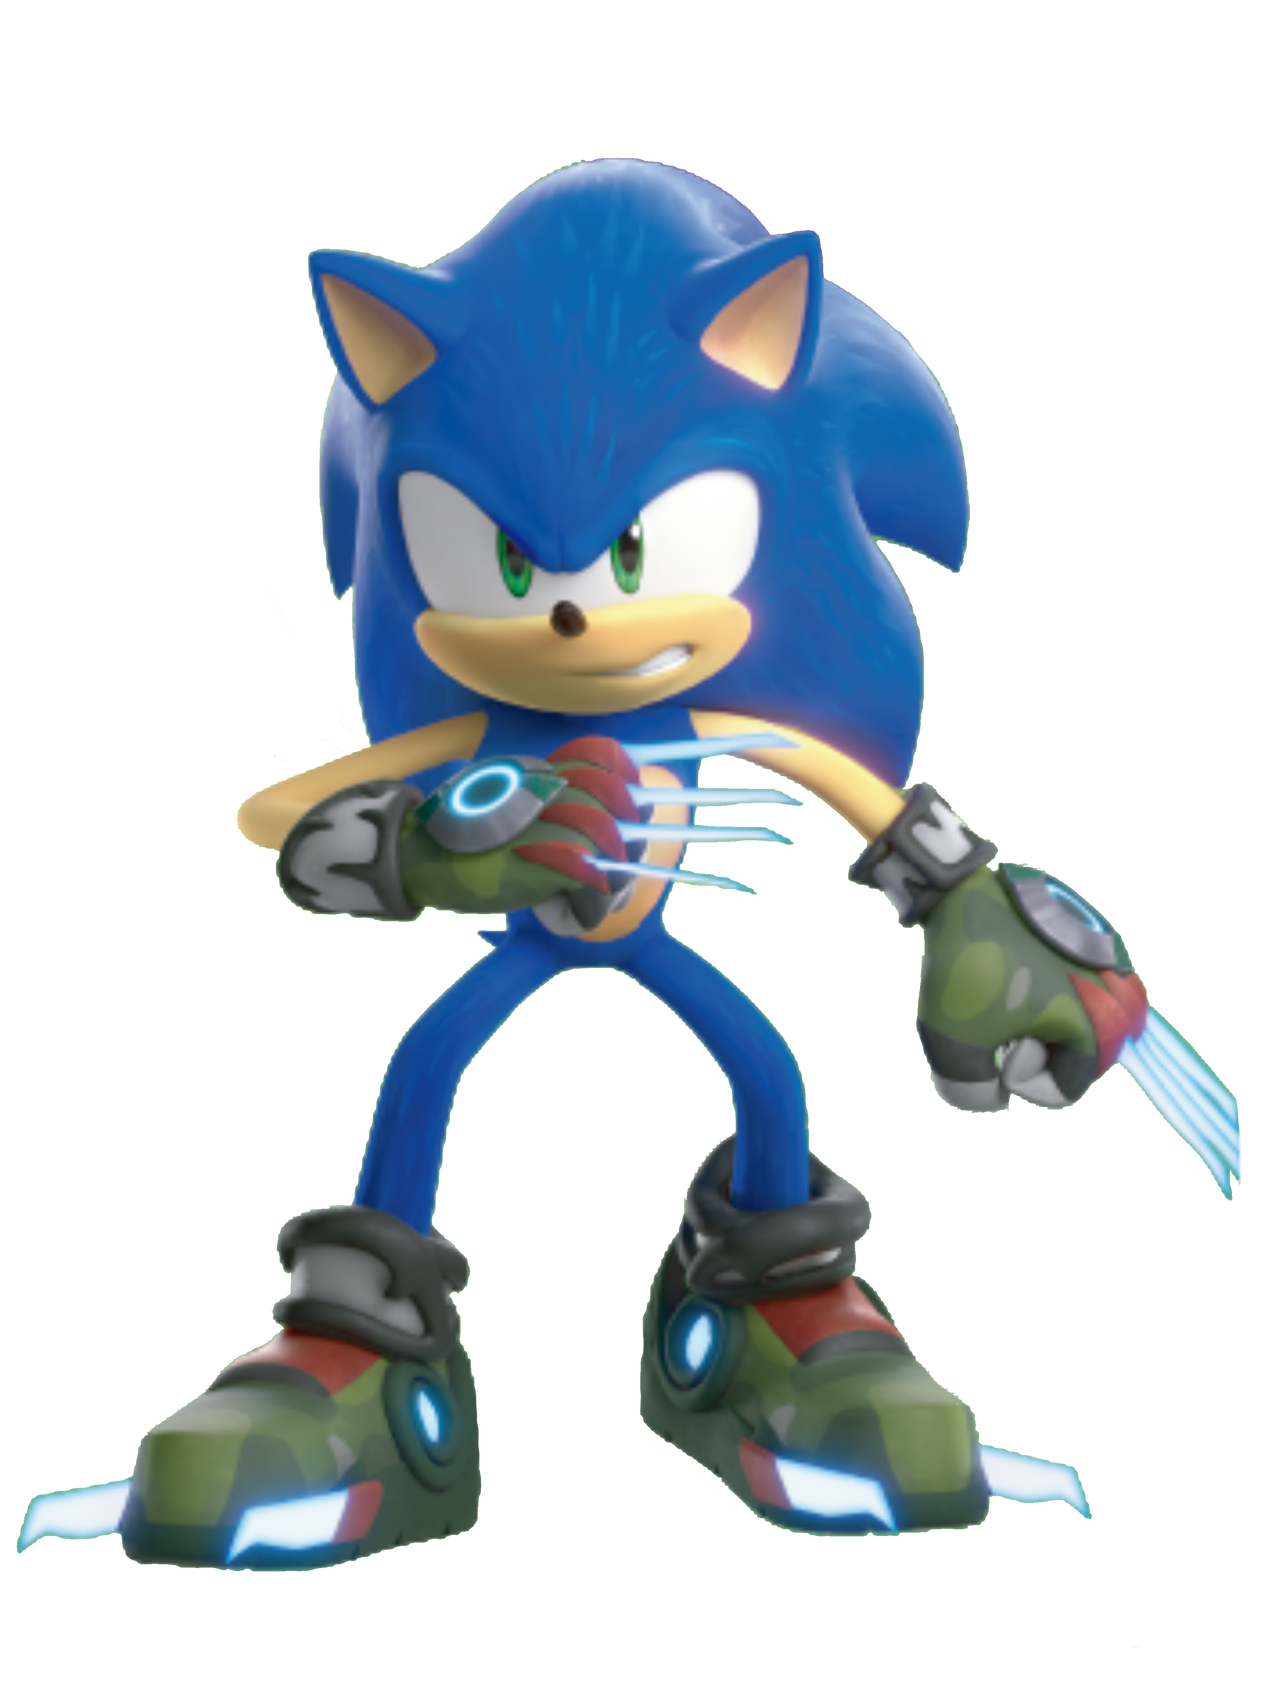 Sonic Dash Prime Sonic (Boscage Maze Style 2.0) by Danic574 on